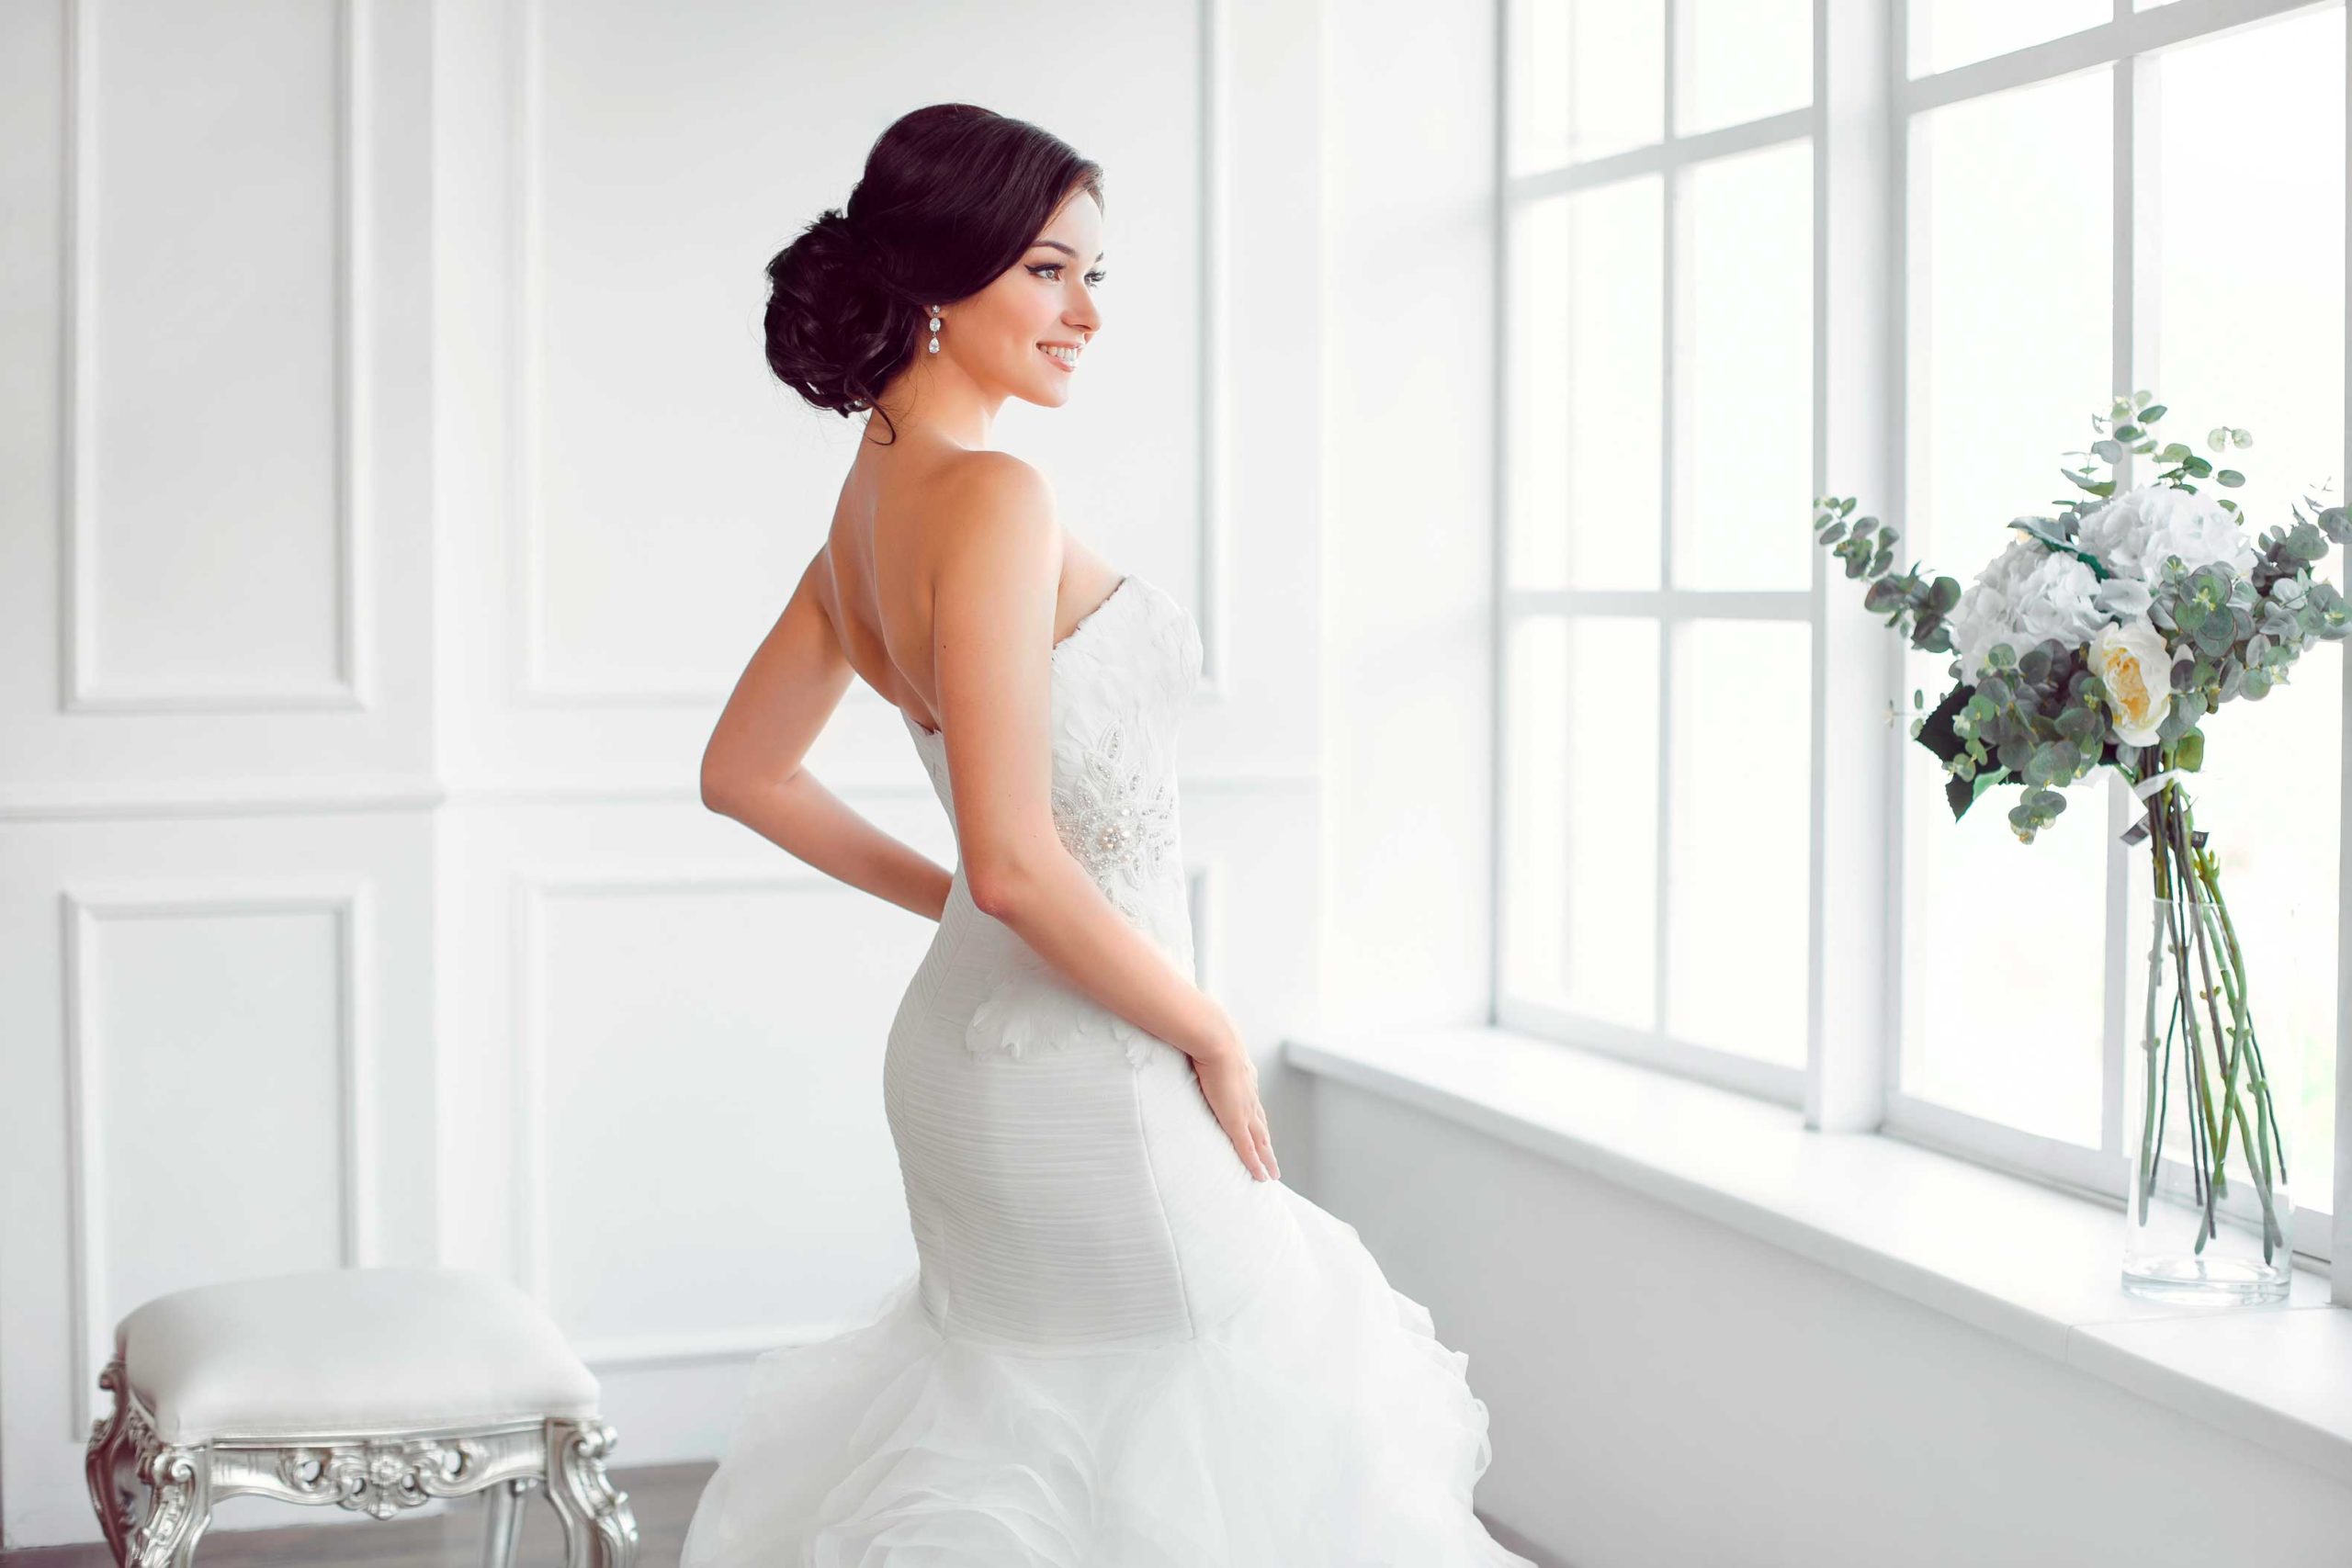 02_Mr-Jeff_Products_Actions_Wedding-Dress